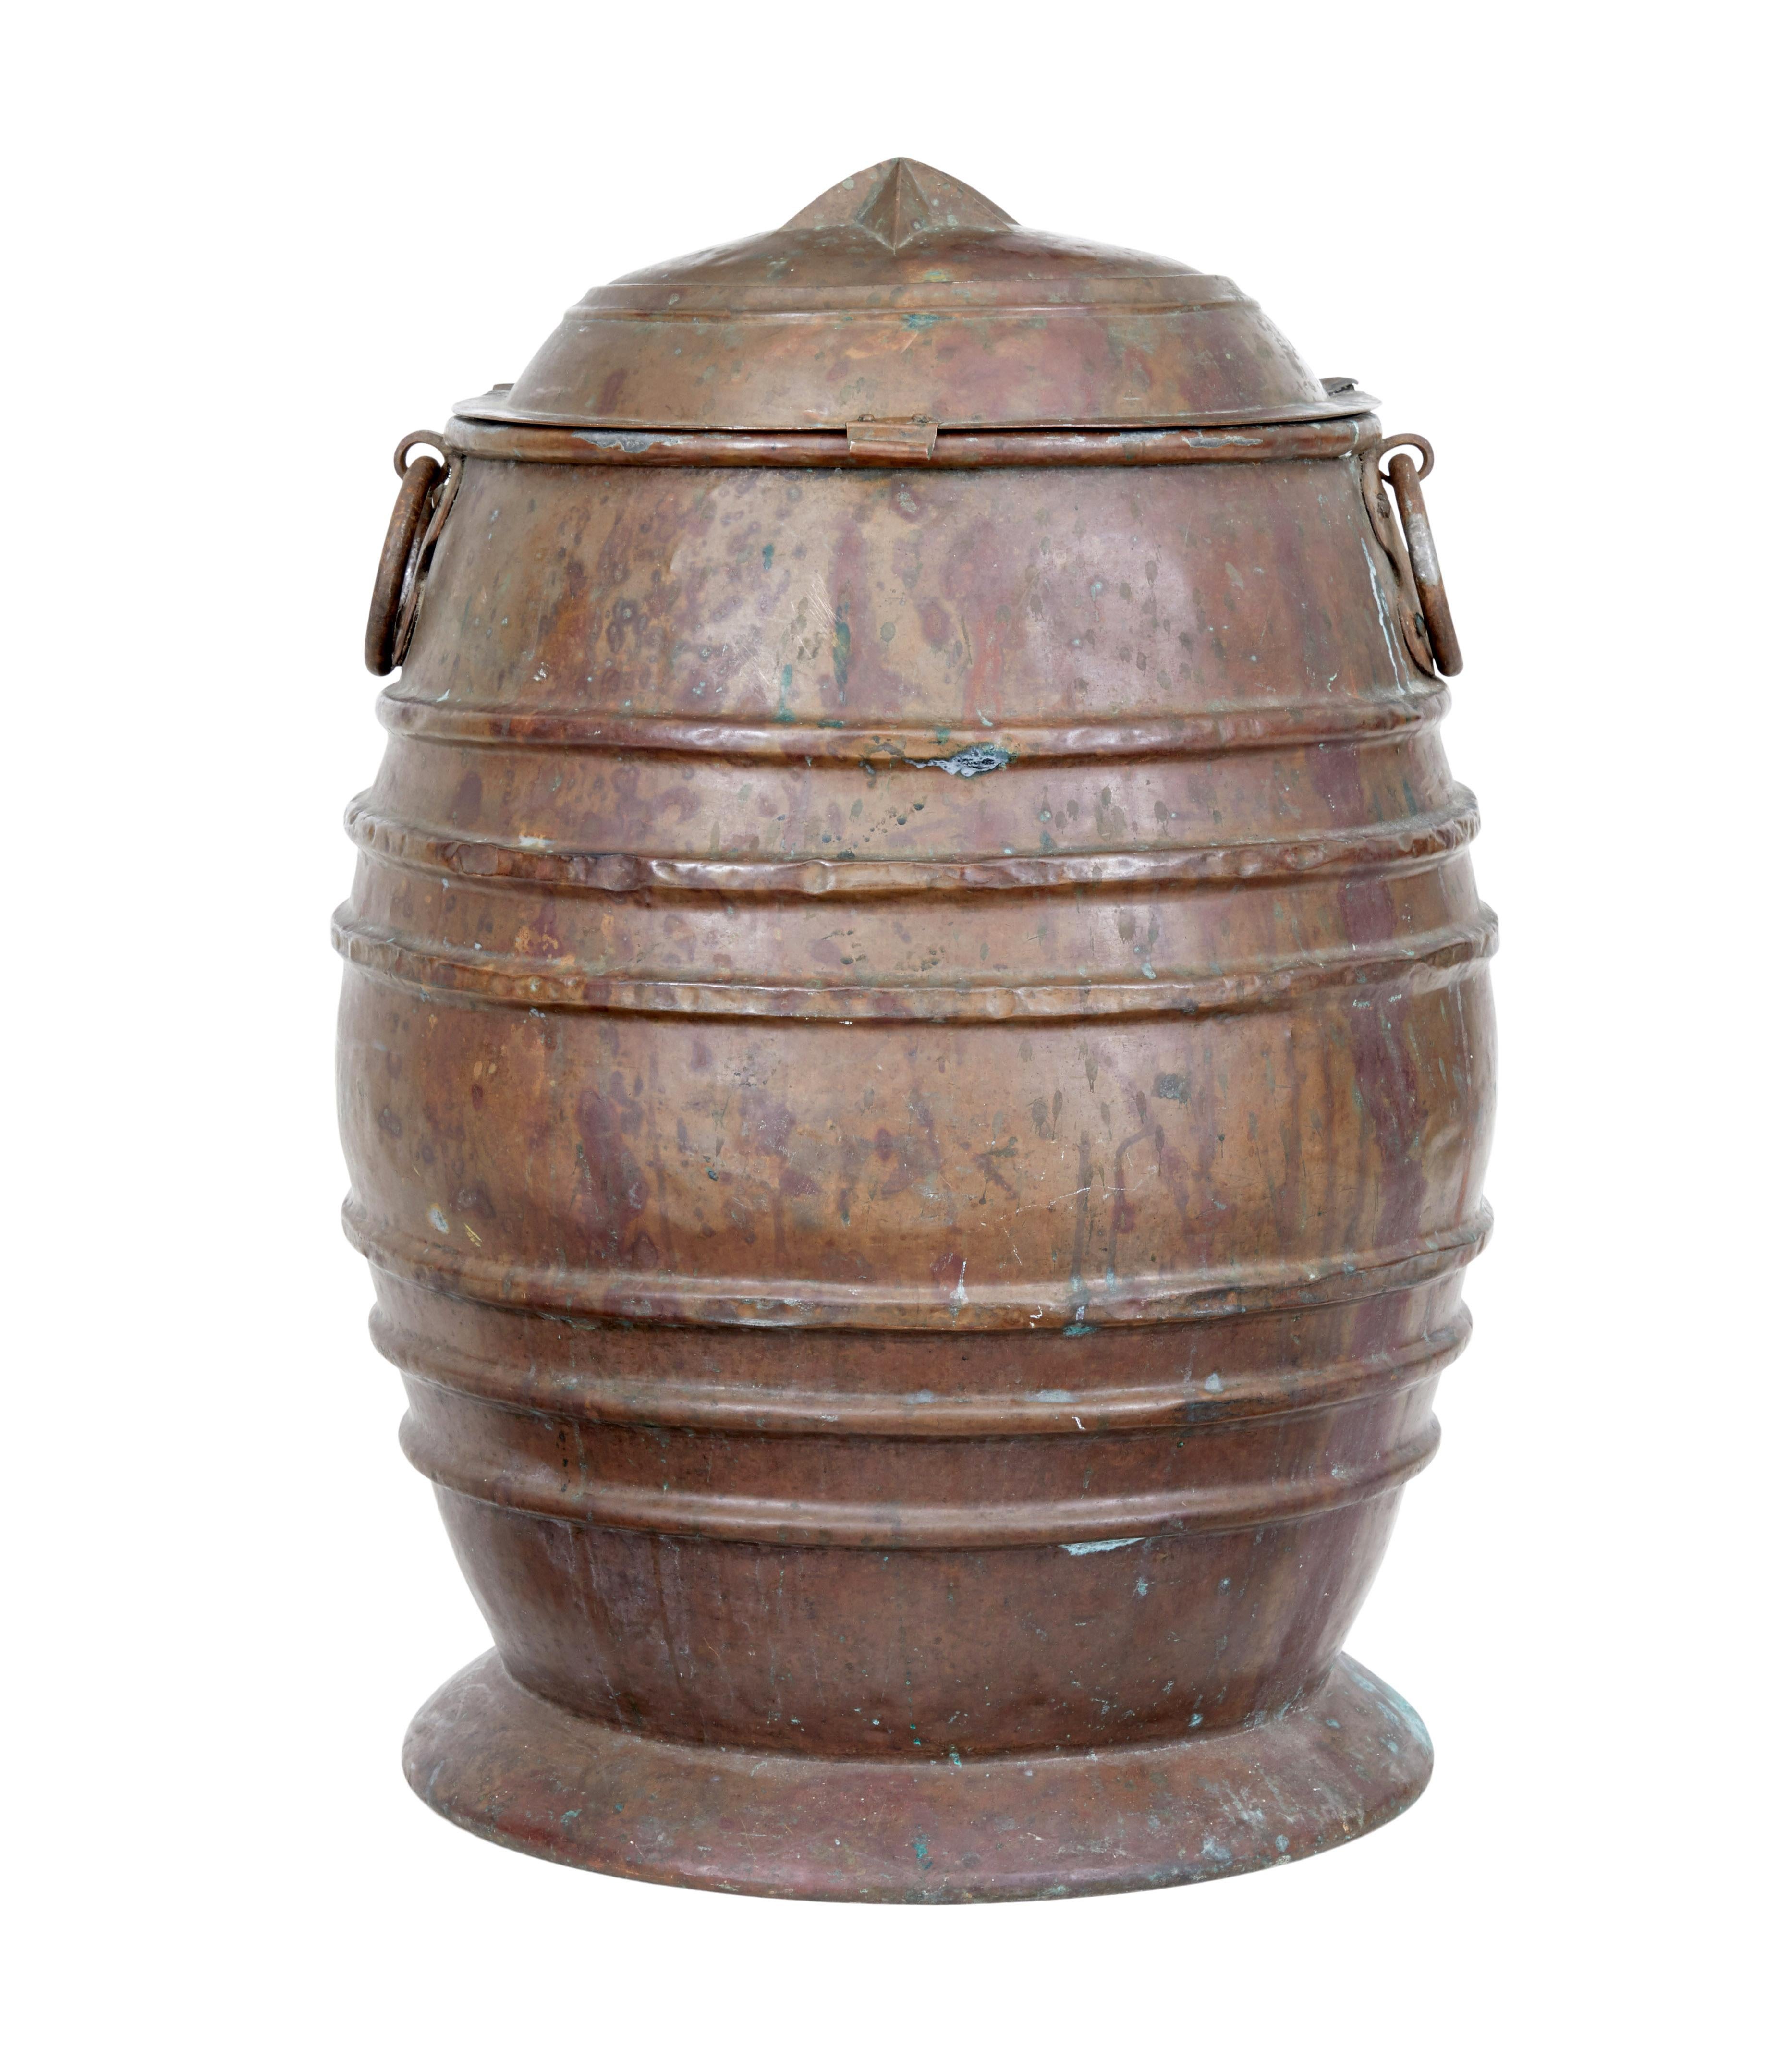 Large decorative 19th century copper storage churn circa 1870.

Stunning churn/still or water container made in copper, complete with original patina.

Beehive shaped with ribbing around the body of the barrel. Complete with original shaped lid